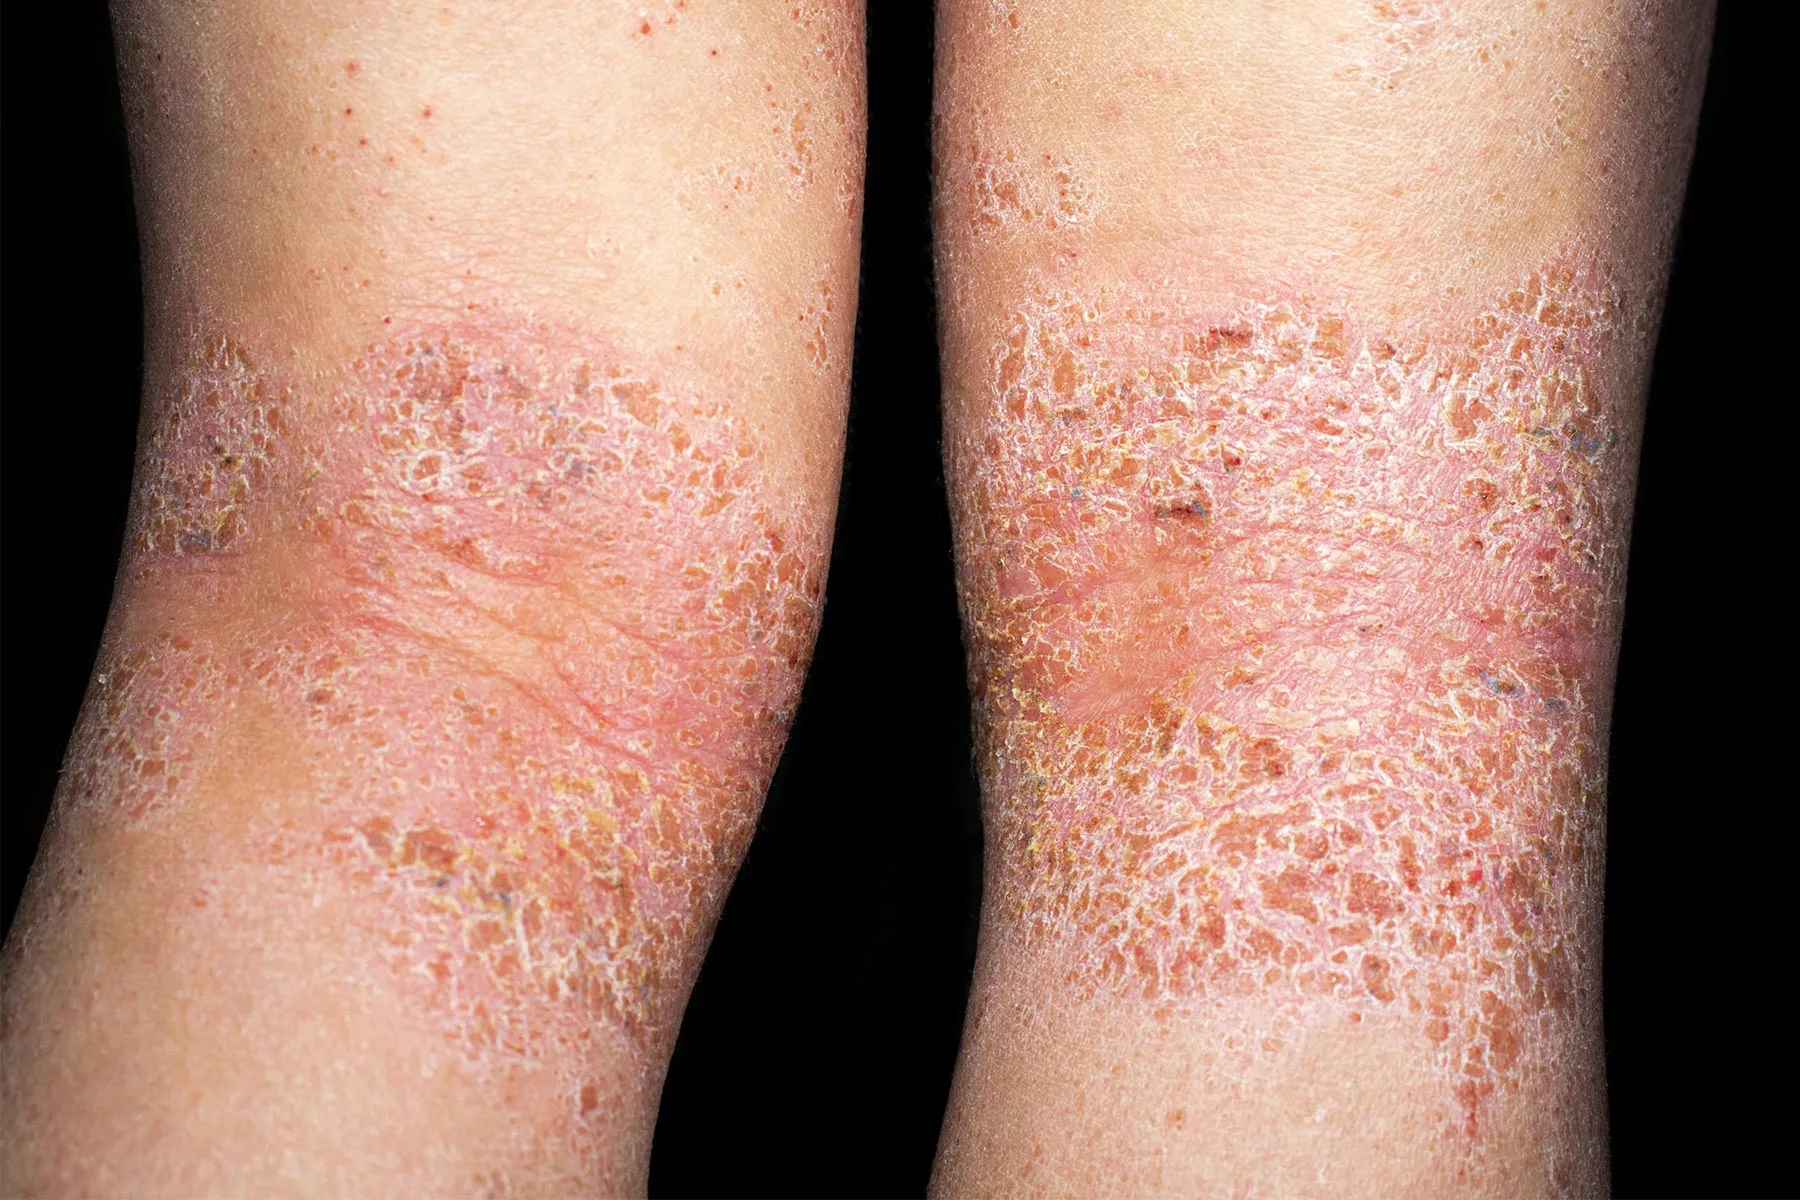 is-it-dry-skin-or-atopic-dermatitis?